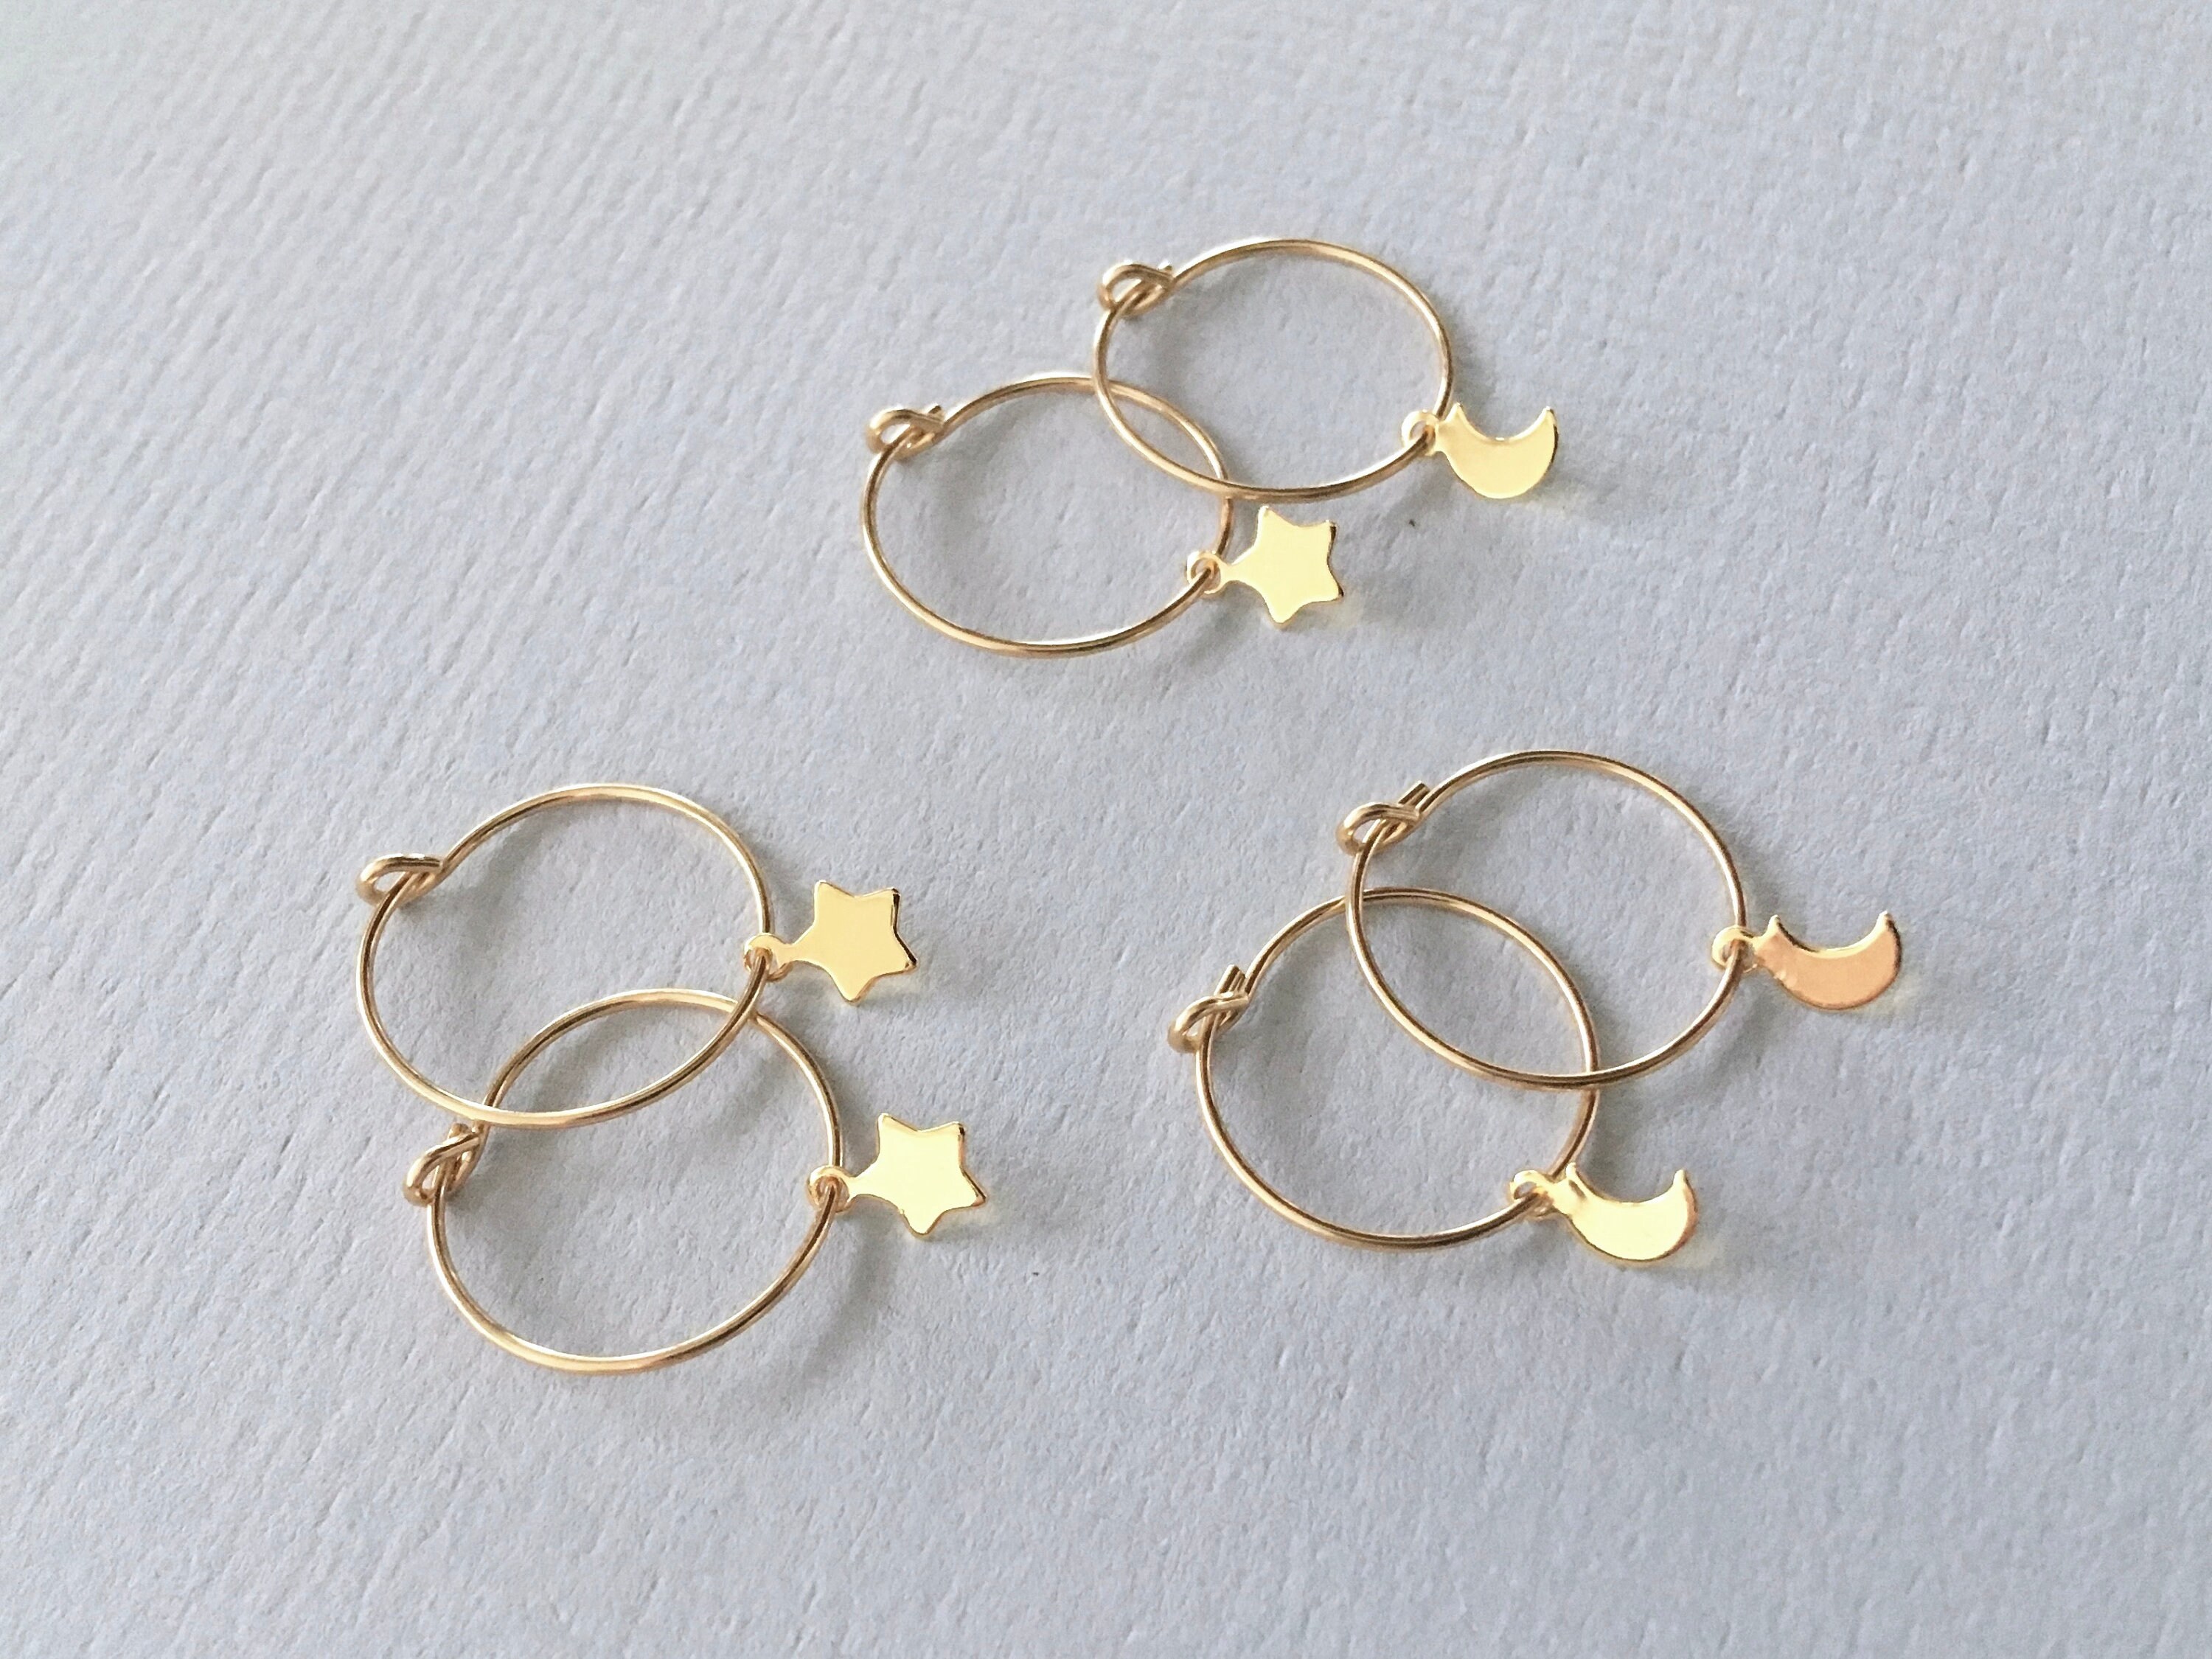 STAR or MOON EARRINGS 14k Gold Filled Everyday Minimalist - Etsy